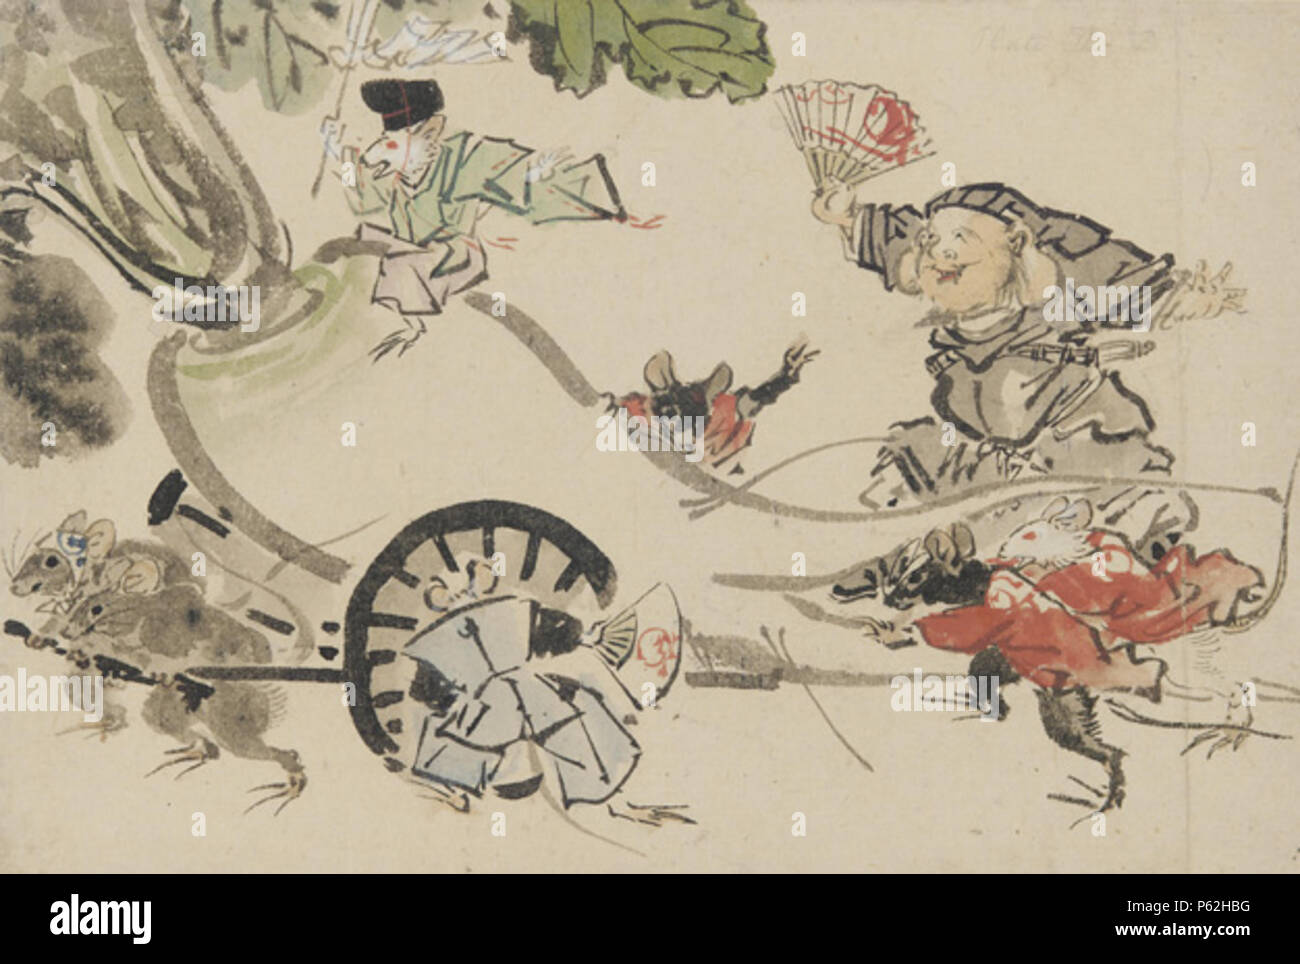 N/A. English: Daikoku with Rats Pulling a Radish Mikoshi by Kawanabe Kyosai (1831-1889) . 22 August 2011.   Kawanabe Kysai  (1831–1889)     Description Japanese painter  Date of birth/death 18 May 1831 26 April 1889  Location of birth/death Koga Tokyo Prefecture  Authority control  : Q2838030 VIAF:50020258 ISNI:0000 0001 2279 759X ULAN:500092866 LCCN:n82024831 Open Library:OL6875142A WorldCat 405 Daikoku with Rats by Kawanabe Kyosai Stock Photo